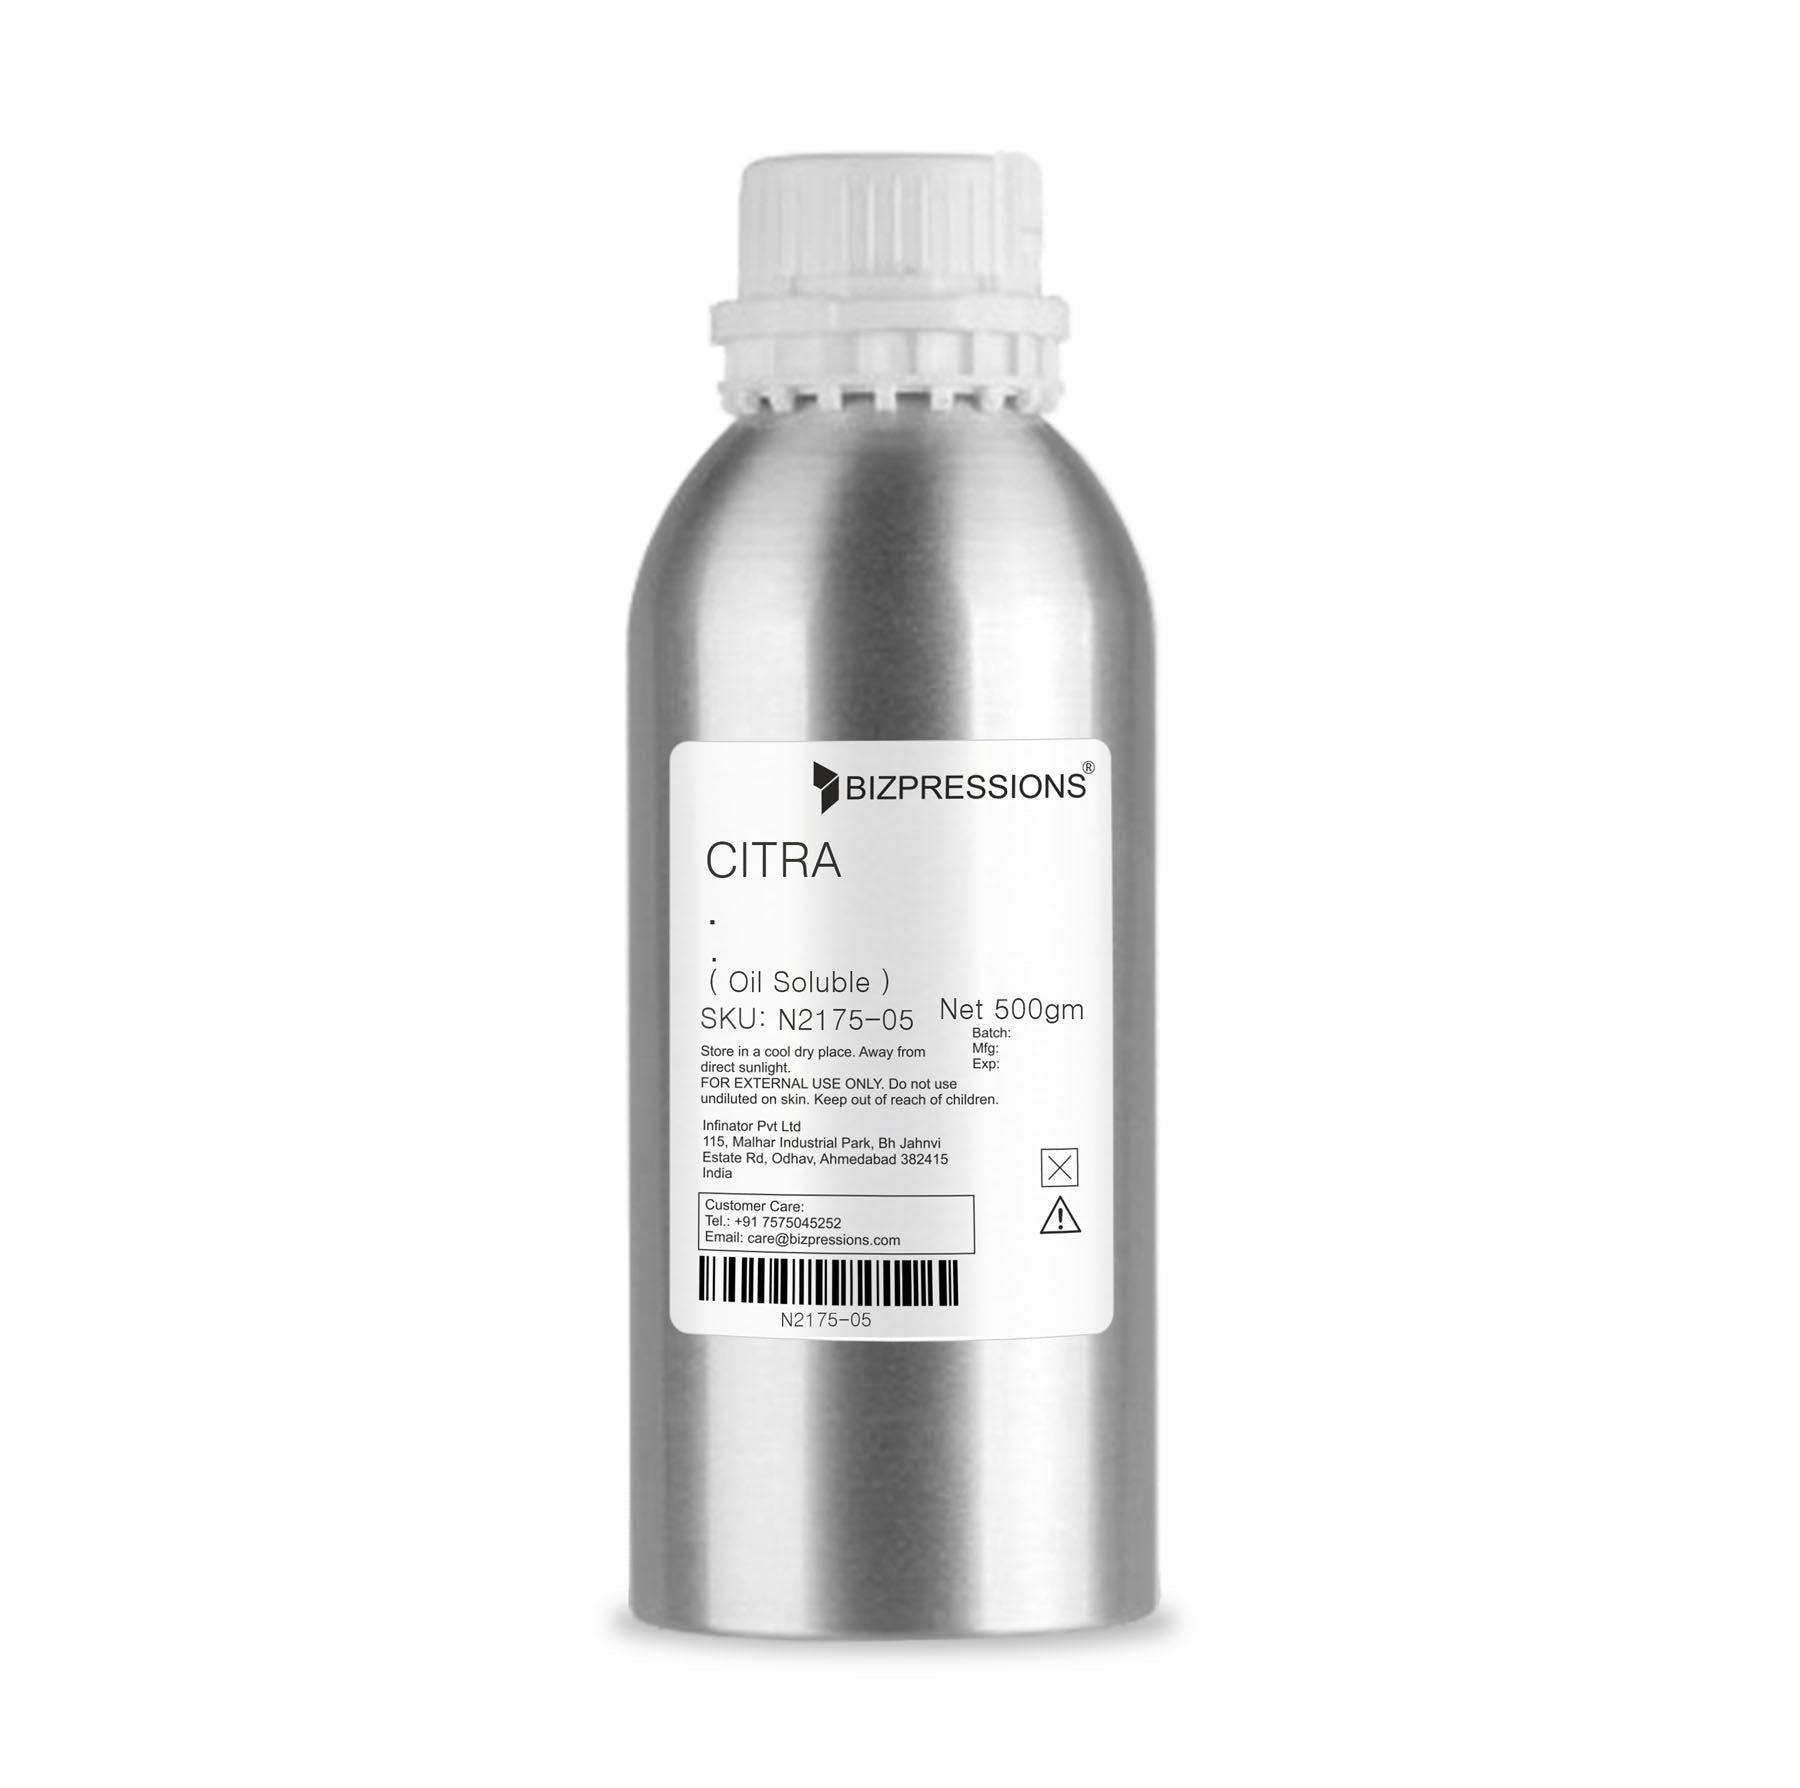 CITRA - Fragrance ( Oil Soluble ) - 500 gm